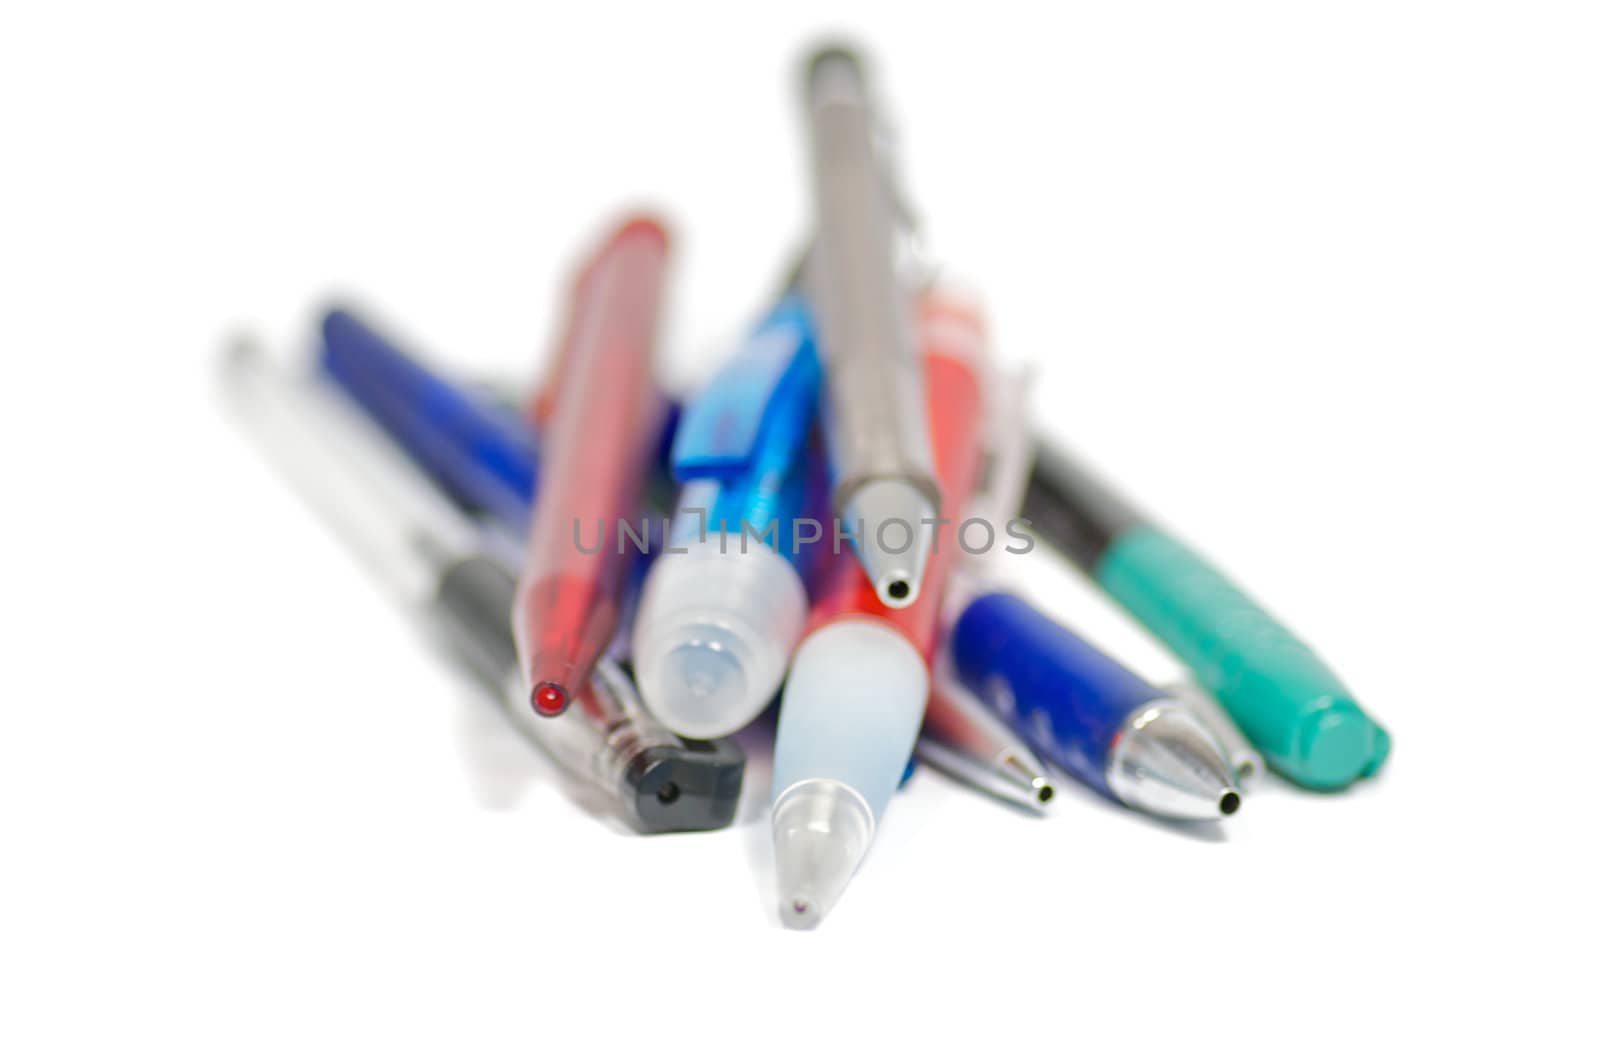 Pens, markers and pencils isolated on white background